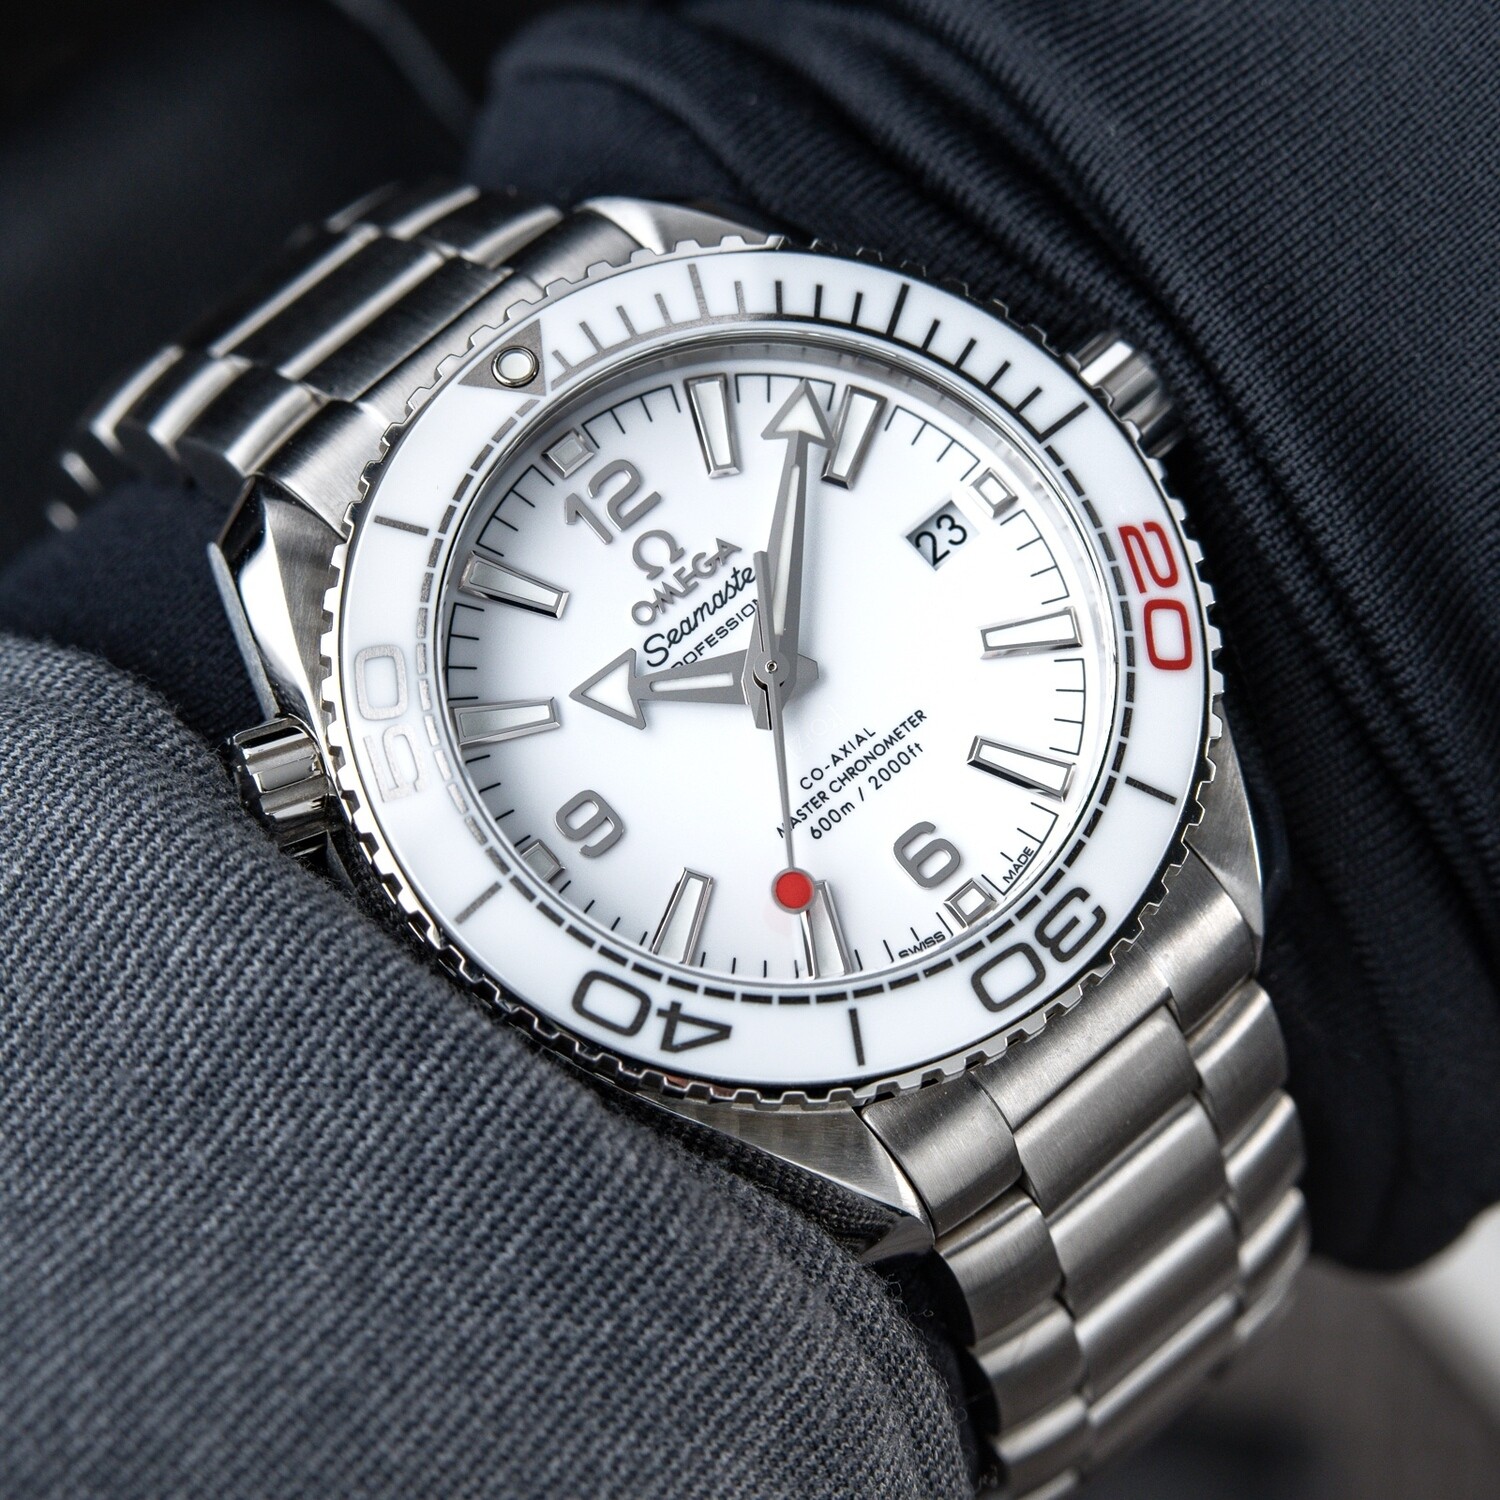 Omega Seamaster Planet Ocean 600M "Tokyo 2020" Limited Edition